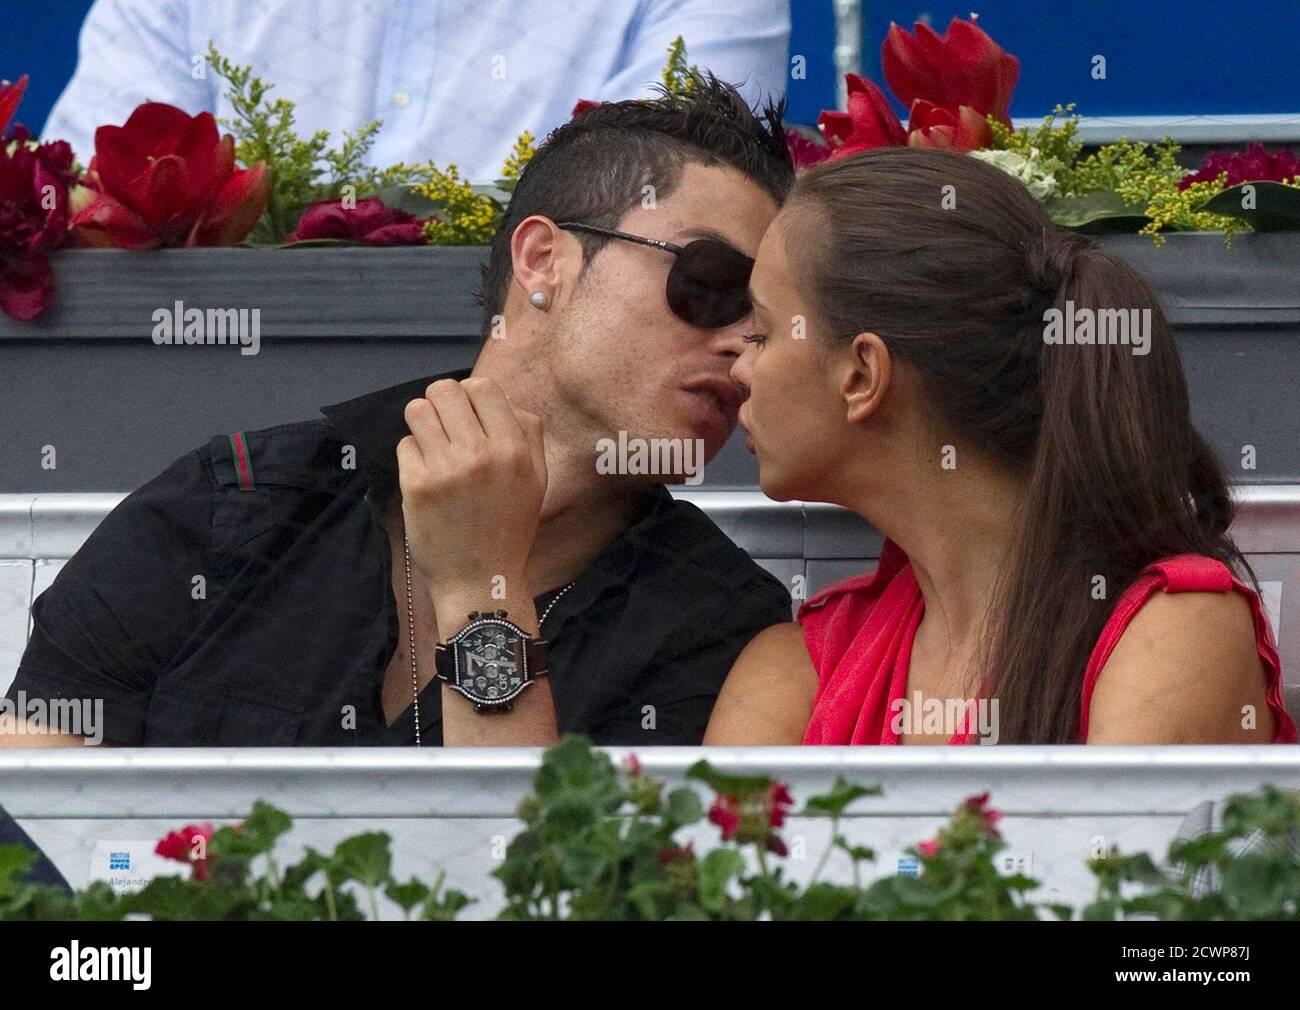 Real Madrid's Cristiano Ronaldo (L) and his girlfriend Irina Shayk kiss  during the men's semi-final match between Roger Federer of Switzerland and  Janko Tipsarevic of Serbia at the Madrid Open tennis tournament